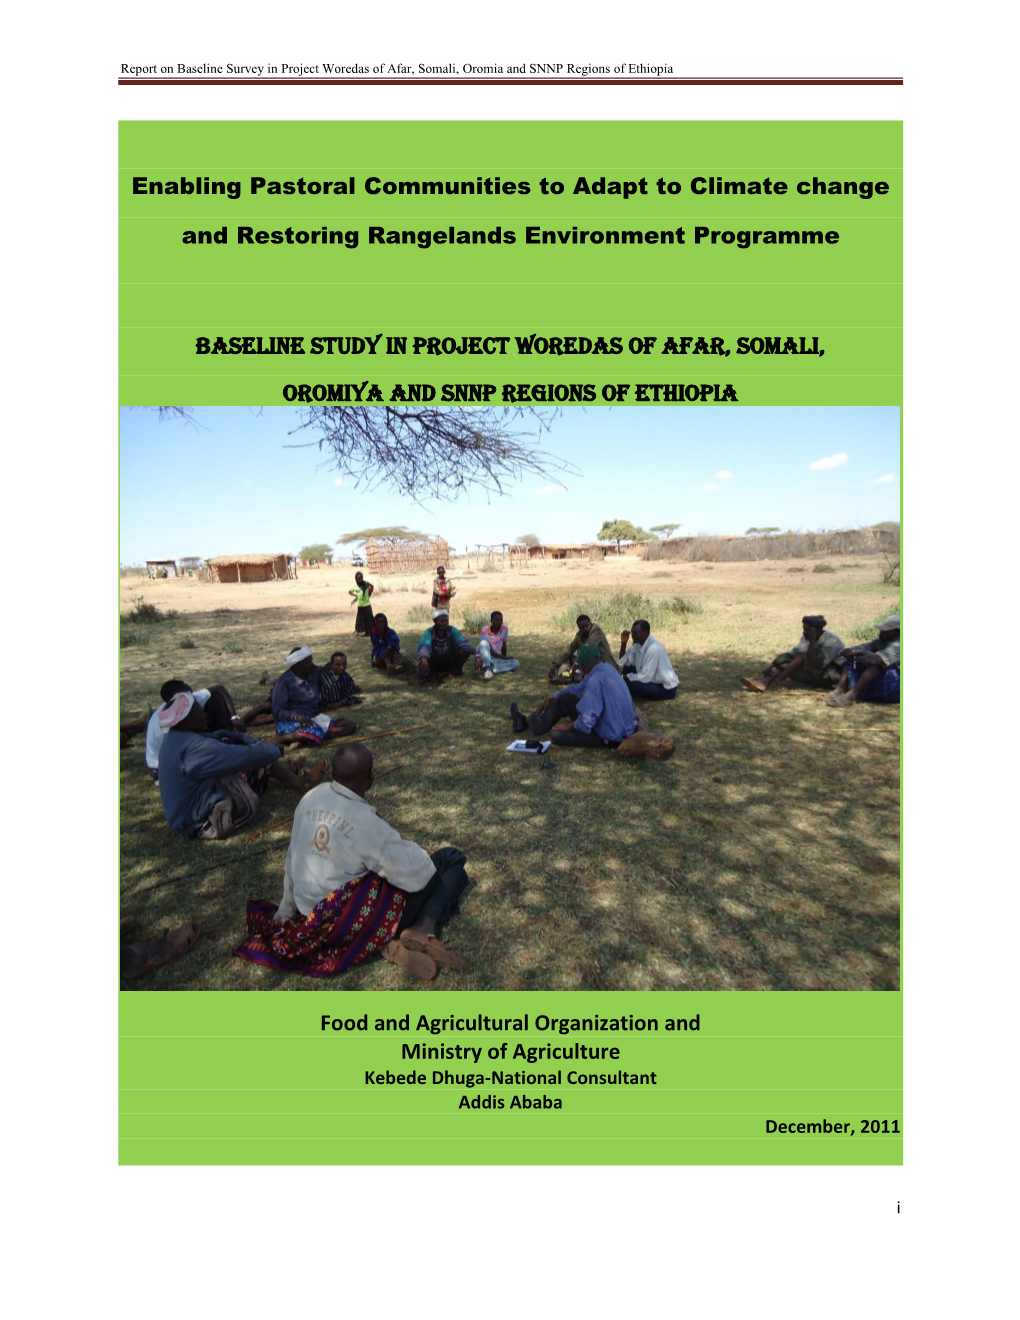 Report on Baseline Survey in Project Woredas of Afar, Somali, Oromia and SNNP Regions of Ethiopia